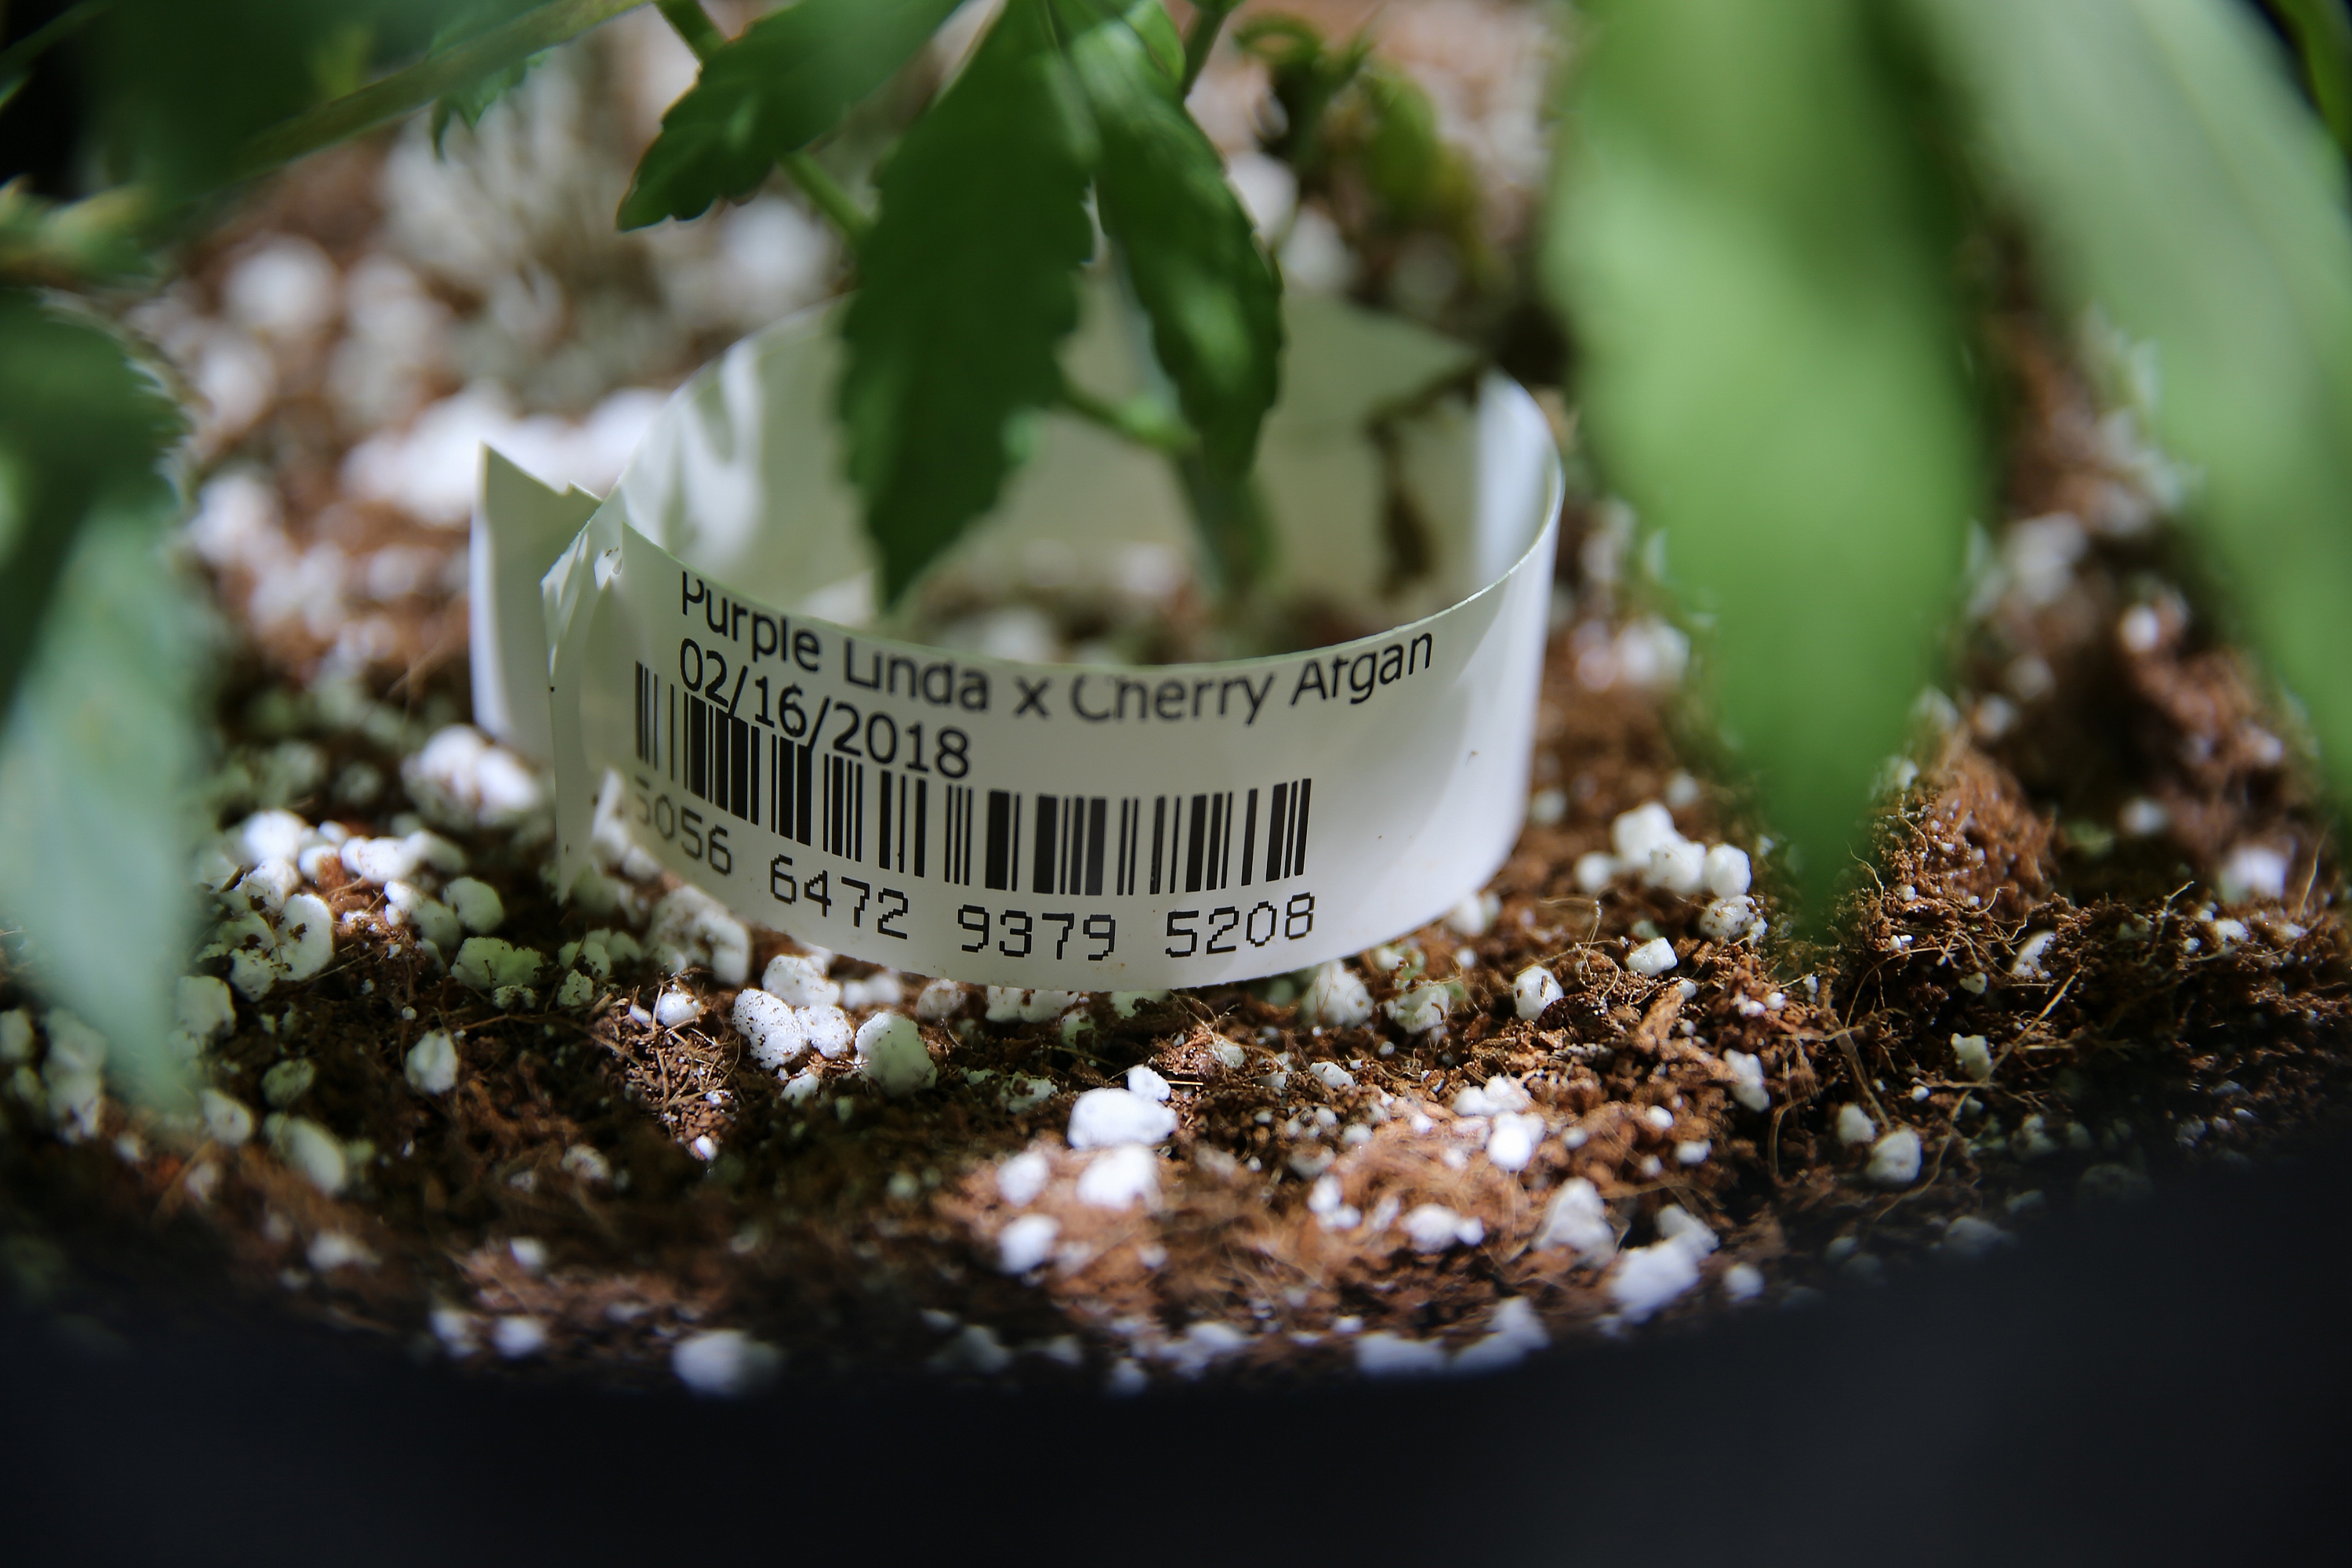 Cannabis is tagged and tracked from seed to sale